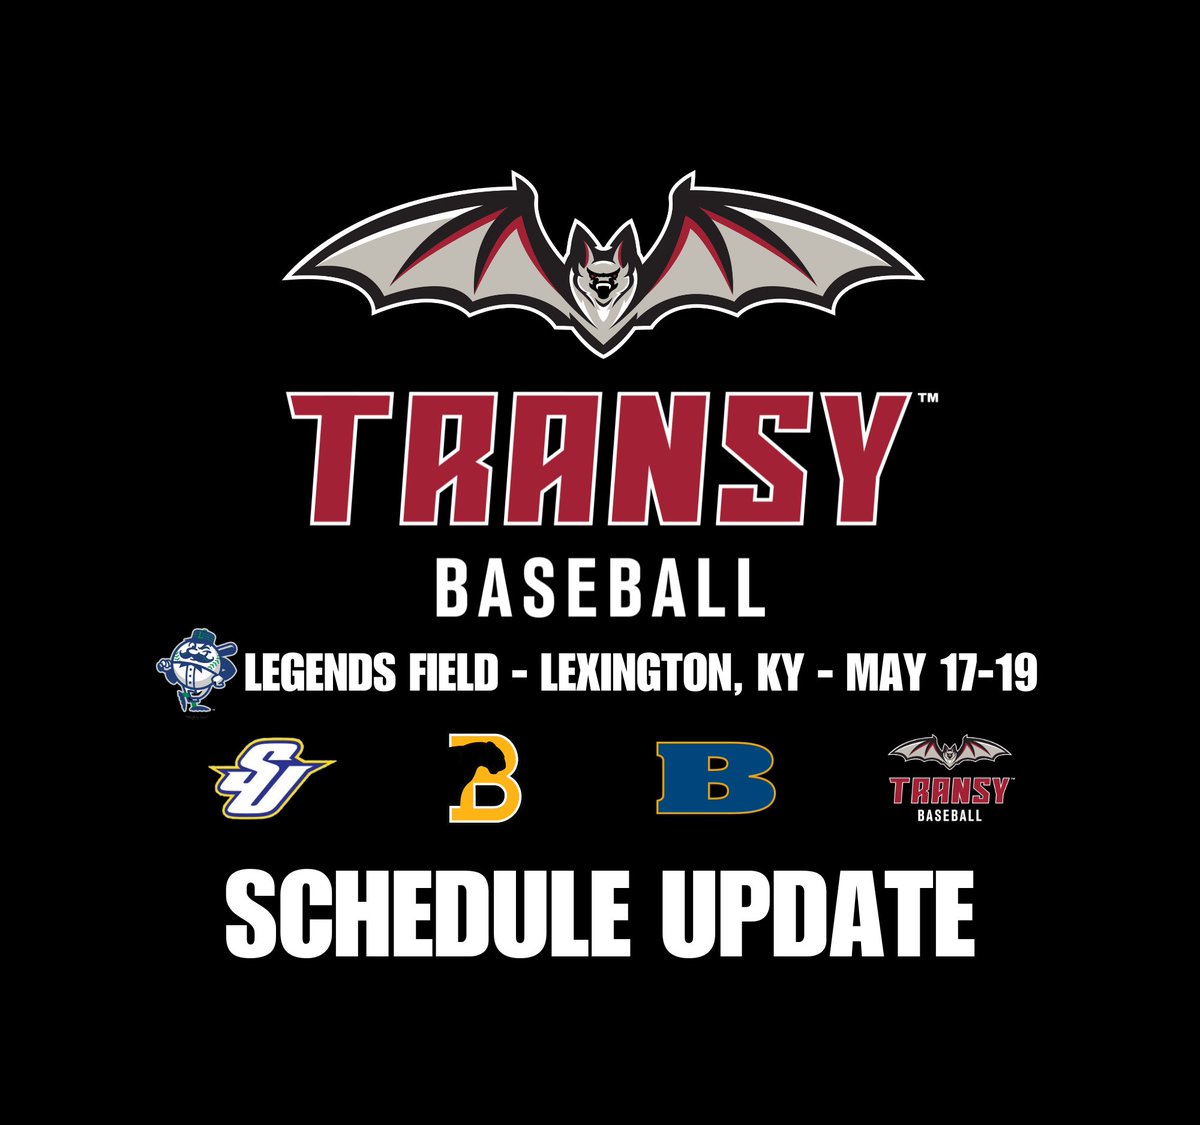 🚨 Transylvania Baseball’s regional will not start on time today due to weather. Game one between @SUGoldenEagles and @BeloitBucs will now be played at 1 PM. Transylvania and @BSCsports will now play at 4 PM. Gates open at 12 PM. #FlyPios🦇 | @Transy